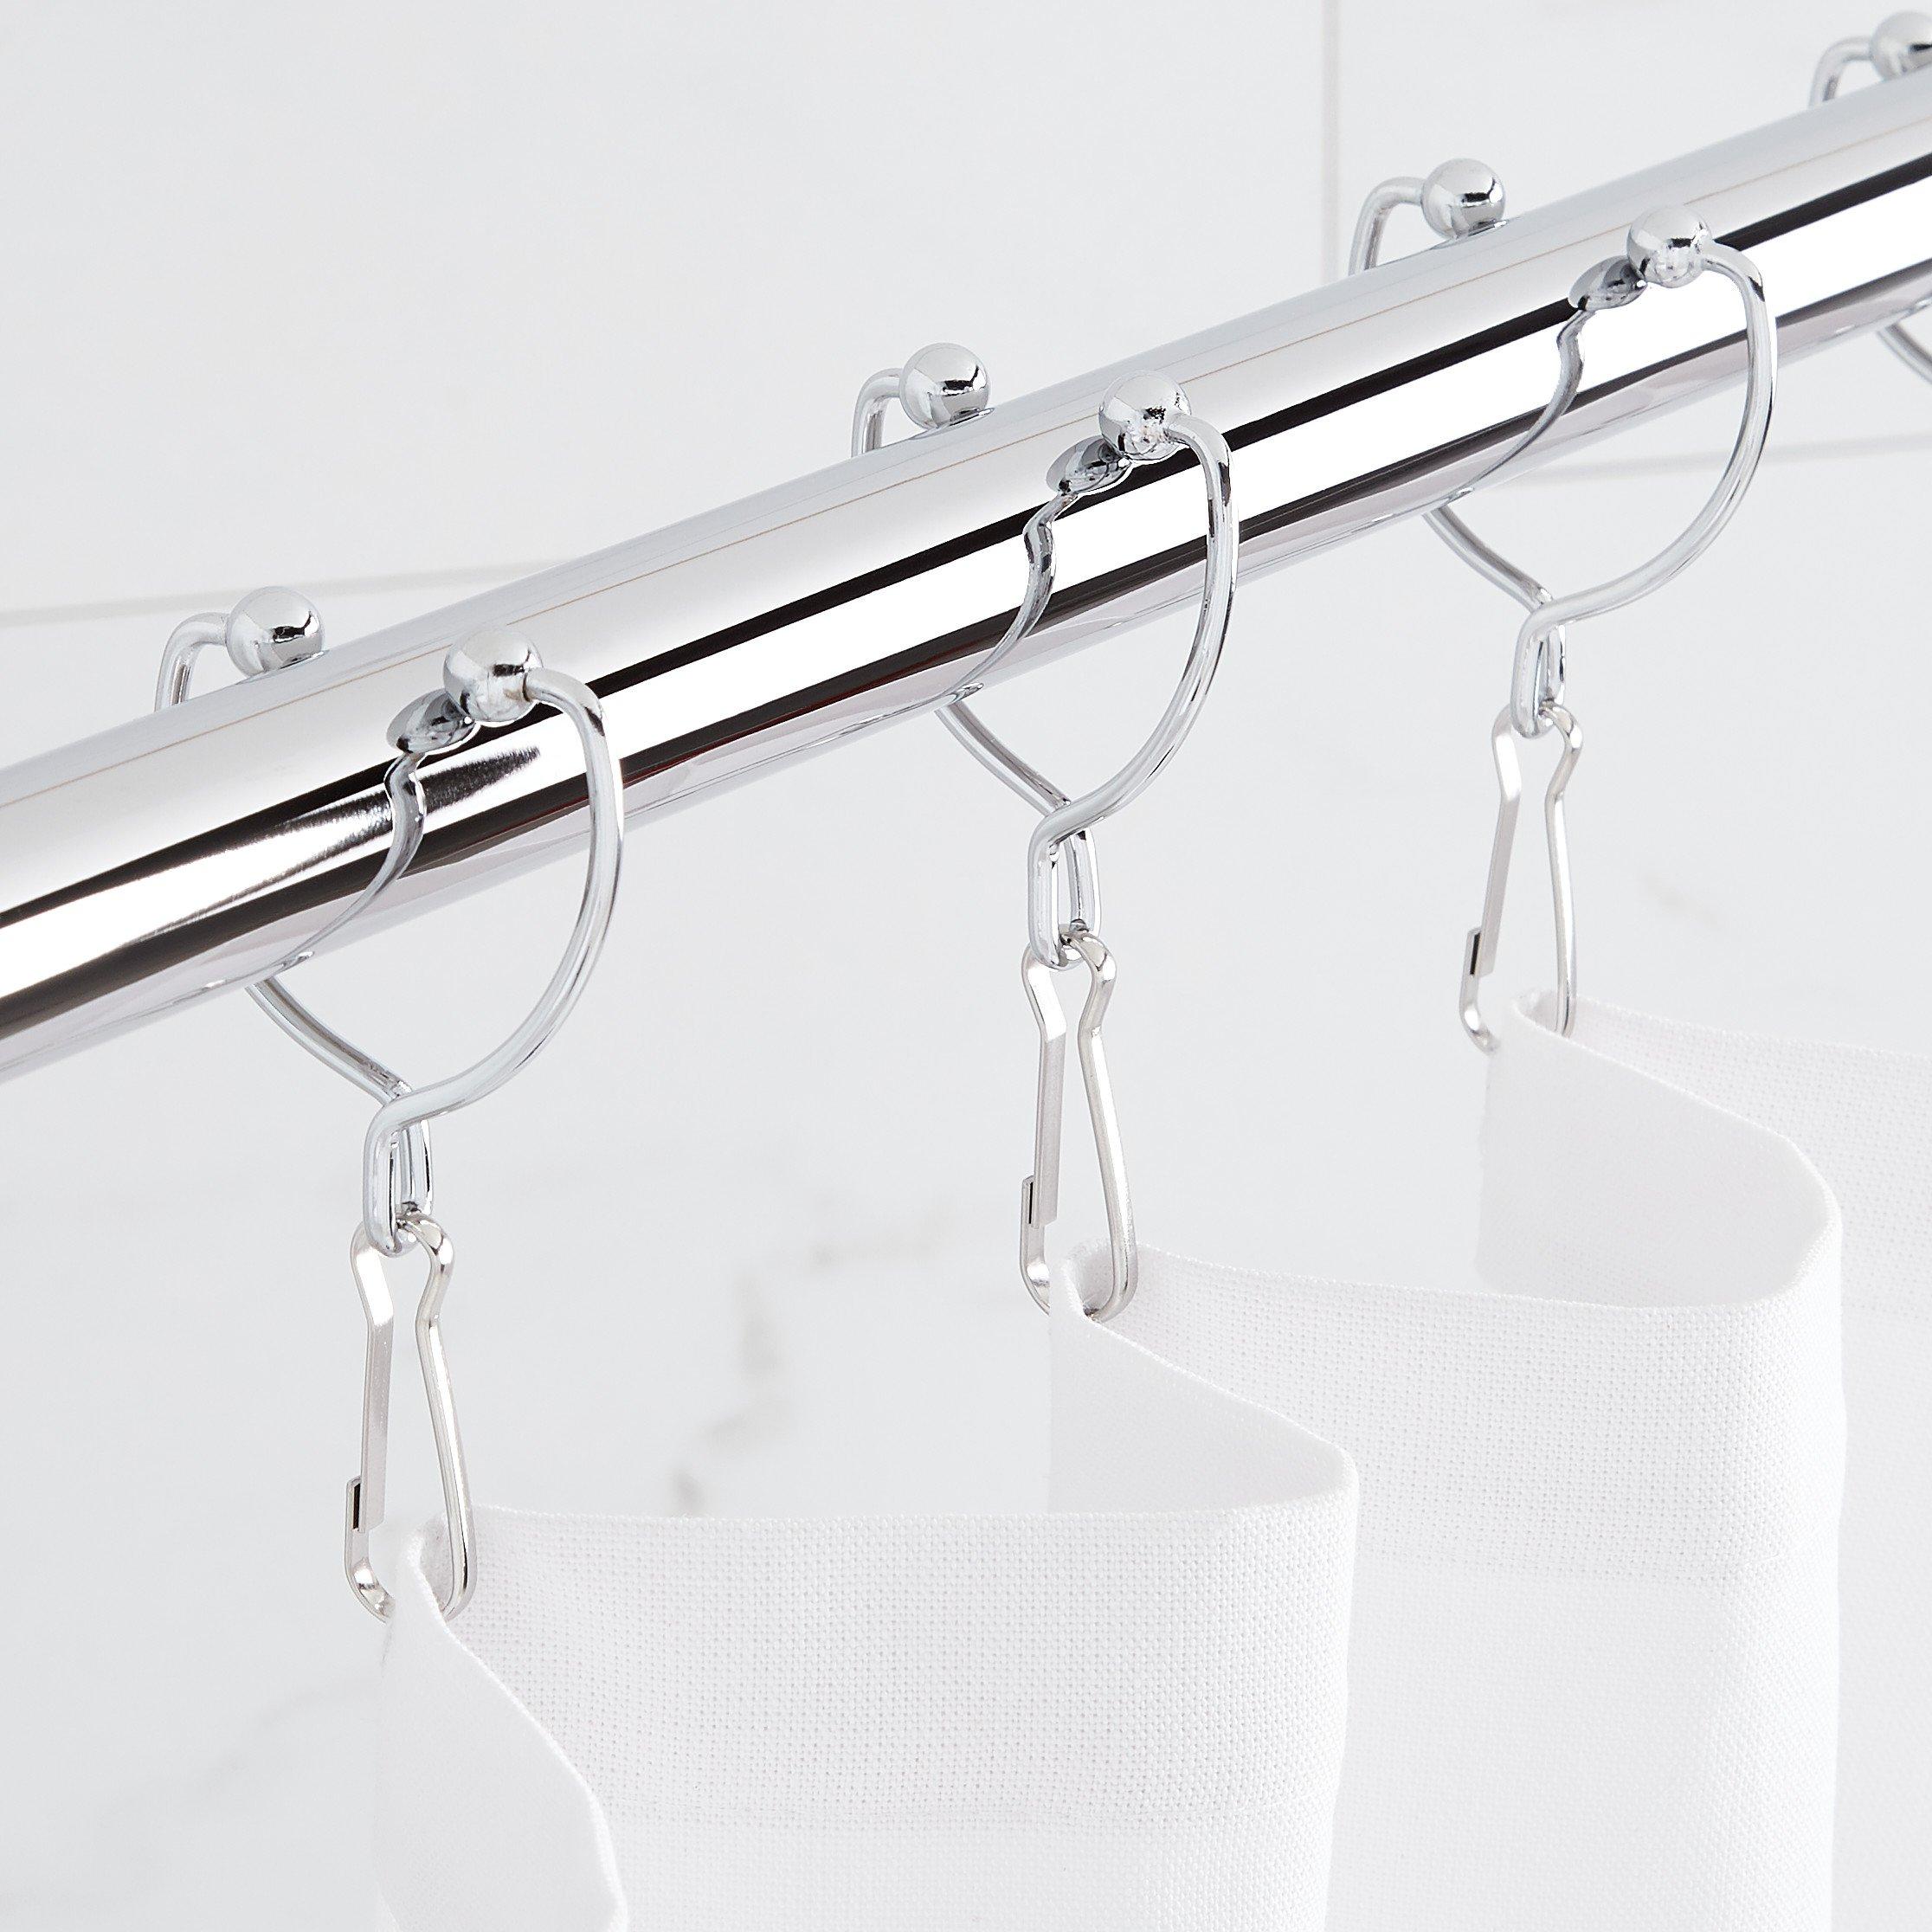 8 Beads 304 Stainless Steel Shower Curtain Hooks Rings Rustproof Double  Glide - China Curtain Hooks, Shower Curtain Hook | Made-in-China.com